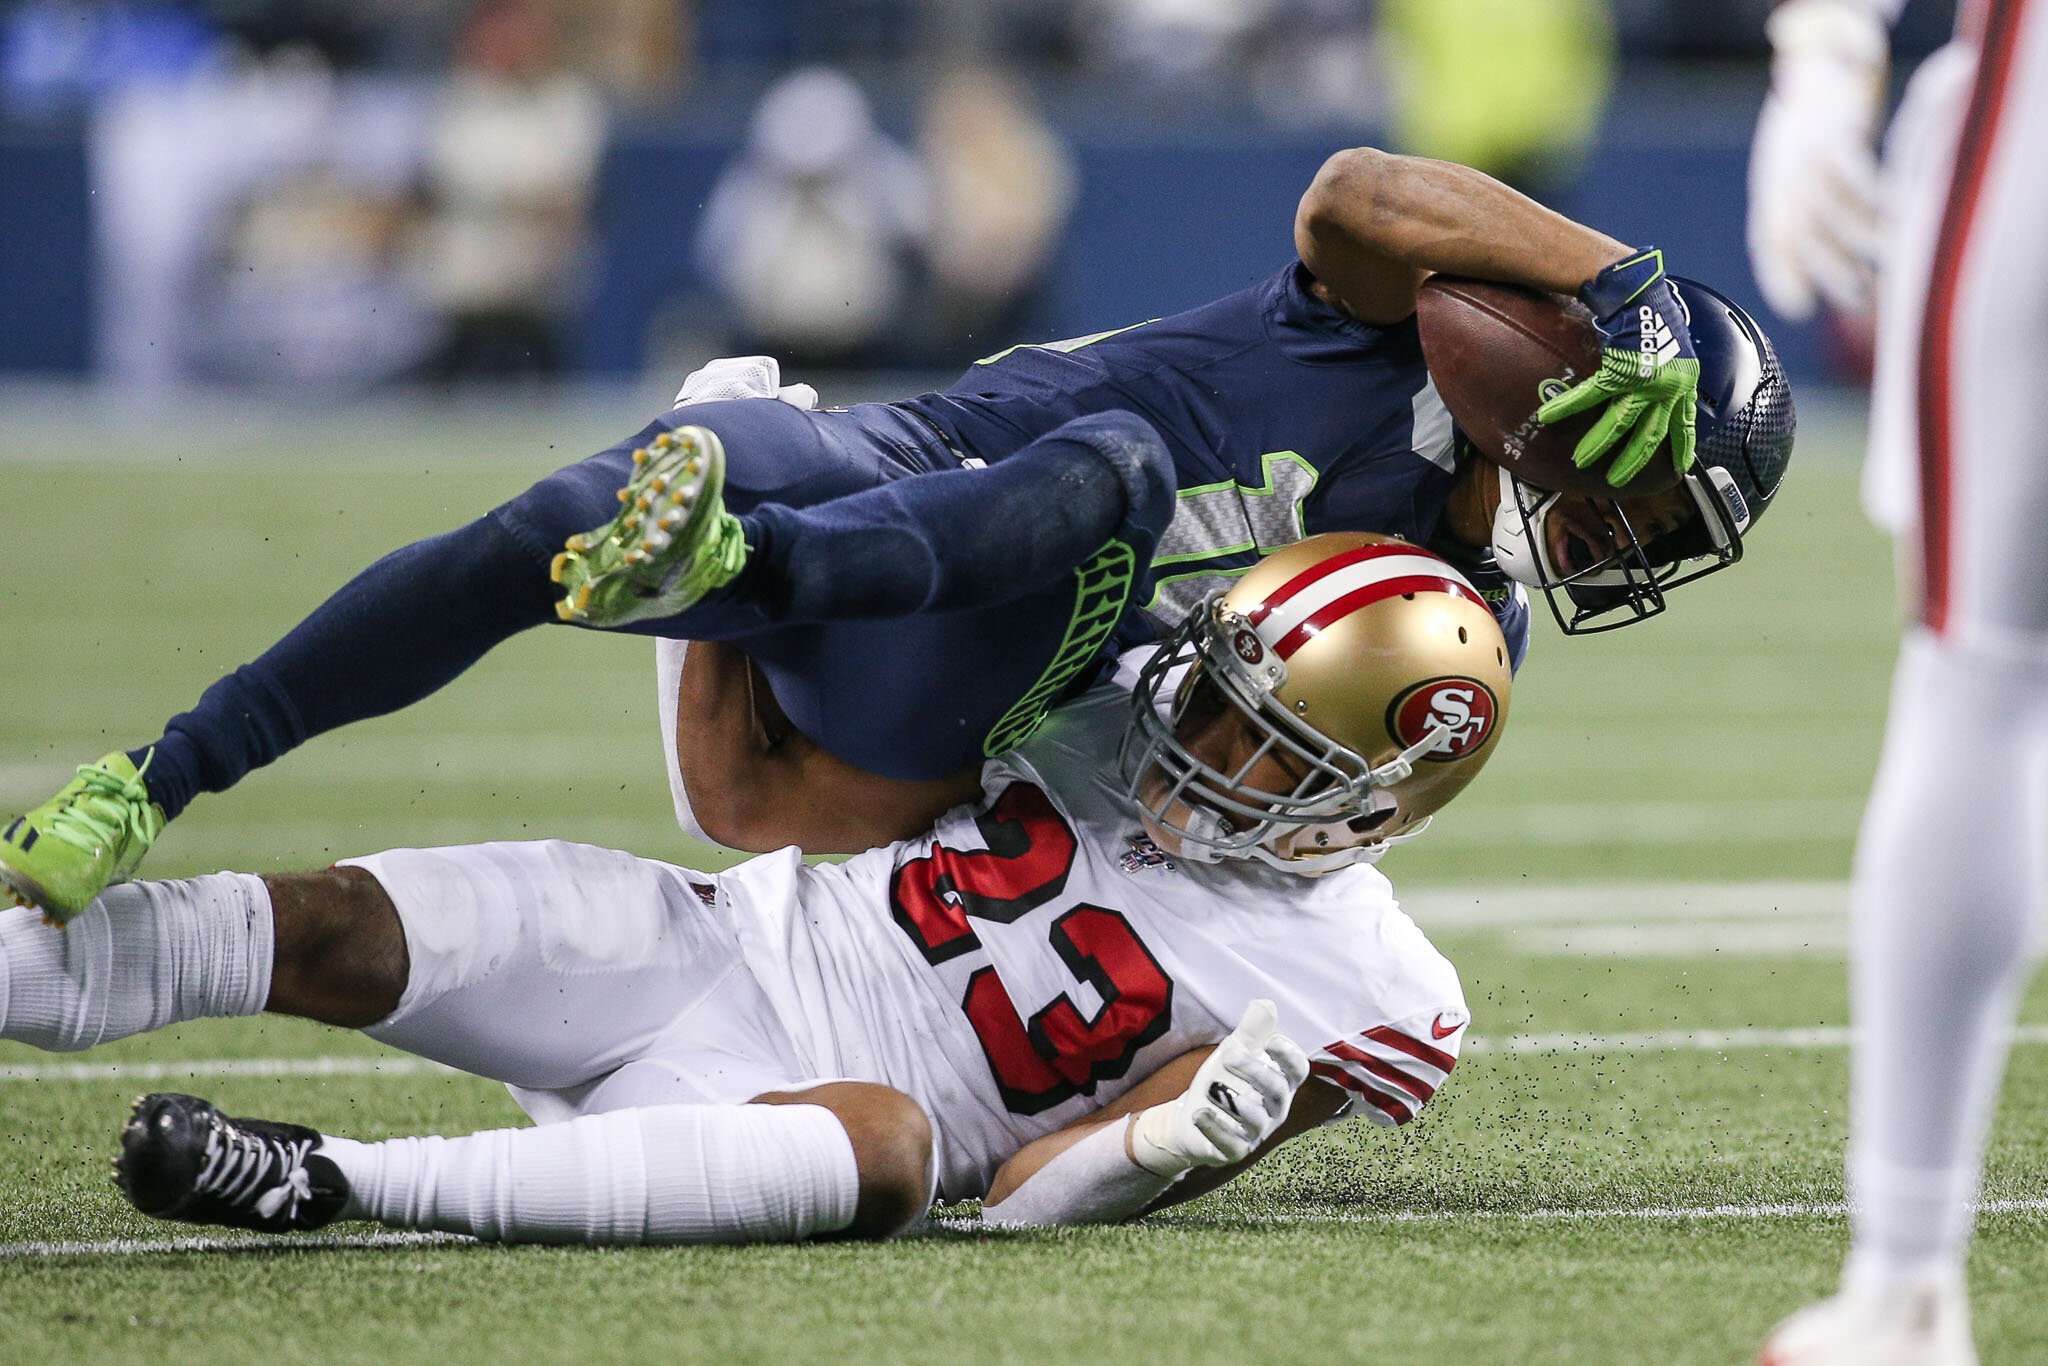  Seattle Seahawks wide receiver Tyler Lockett (16) tackled after a catch and run by San Francisco 49ers cornerback Ahkello Witherspoon (23) during the second quarter of an NFL football game, Sunday, December 29, 2019, in Seattle. The 49ers defeat the